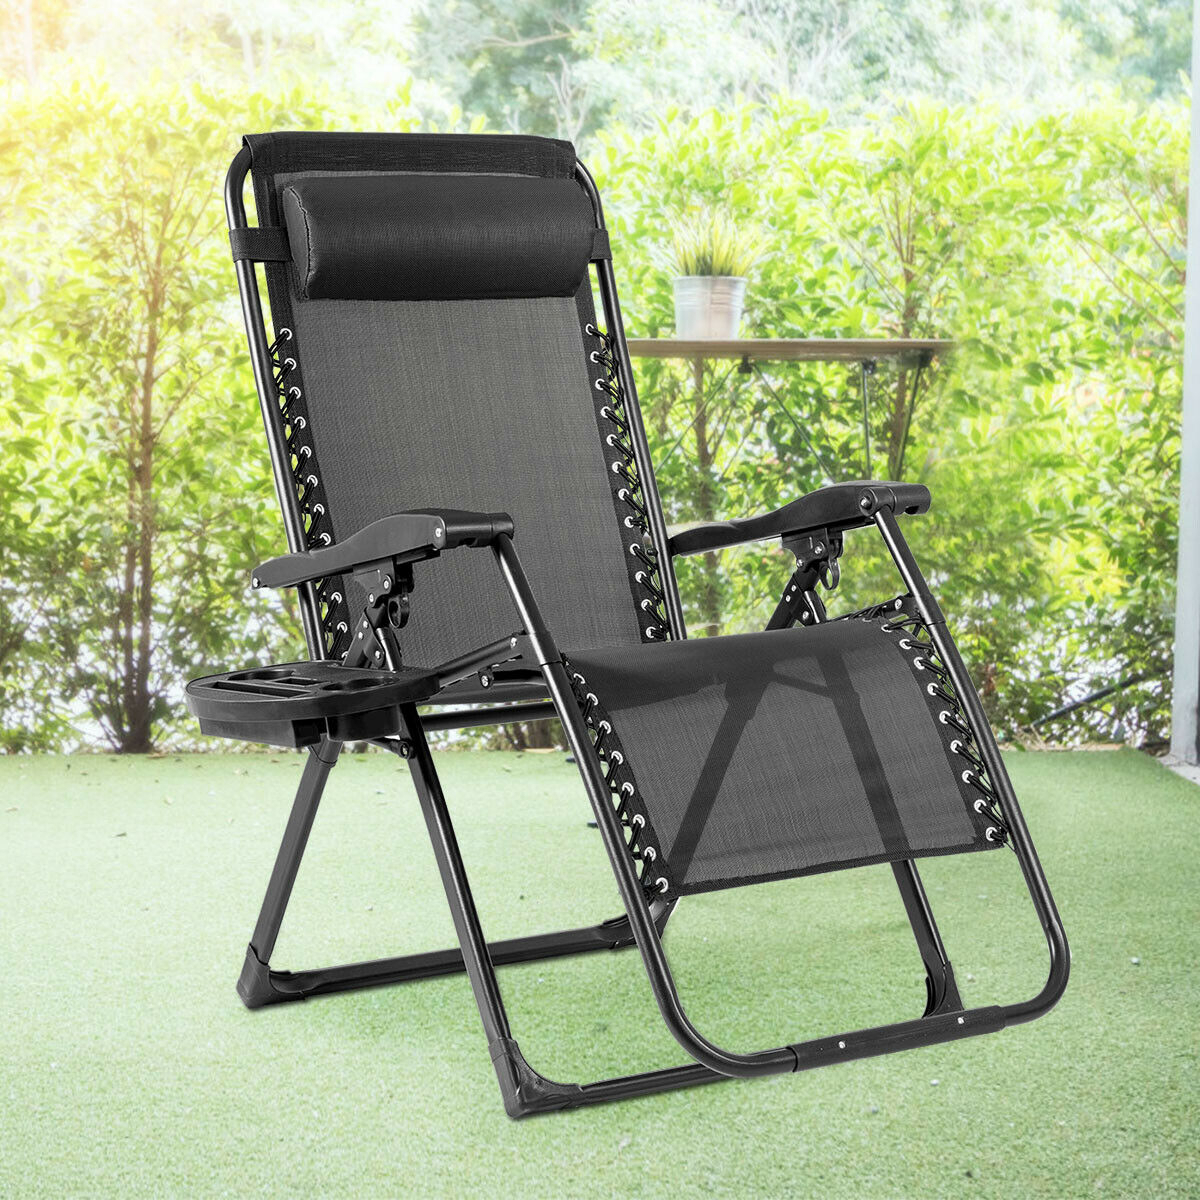 Gymax Folding Zero Gravity Lounge Chair Recliner W/ Cup Holder Tray Pillow - Black